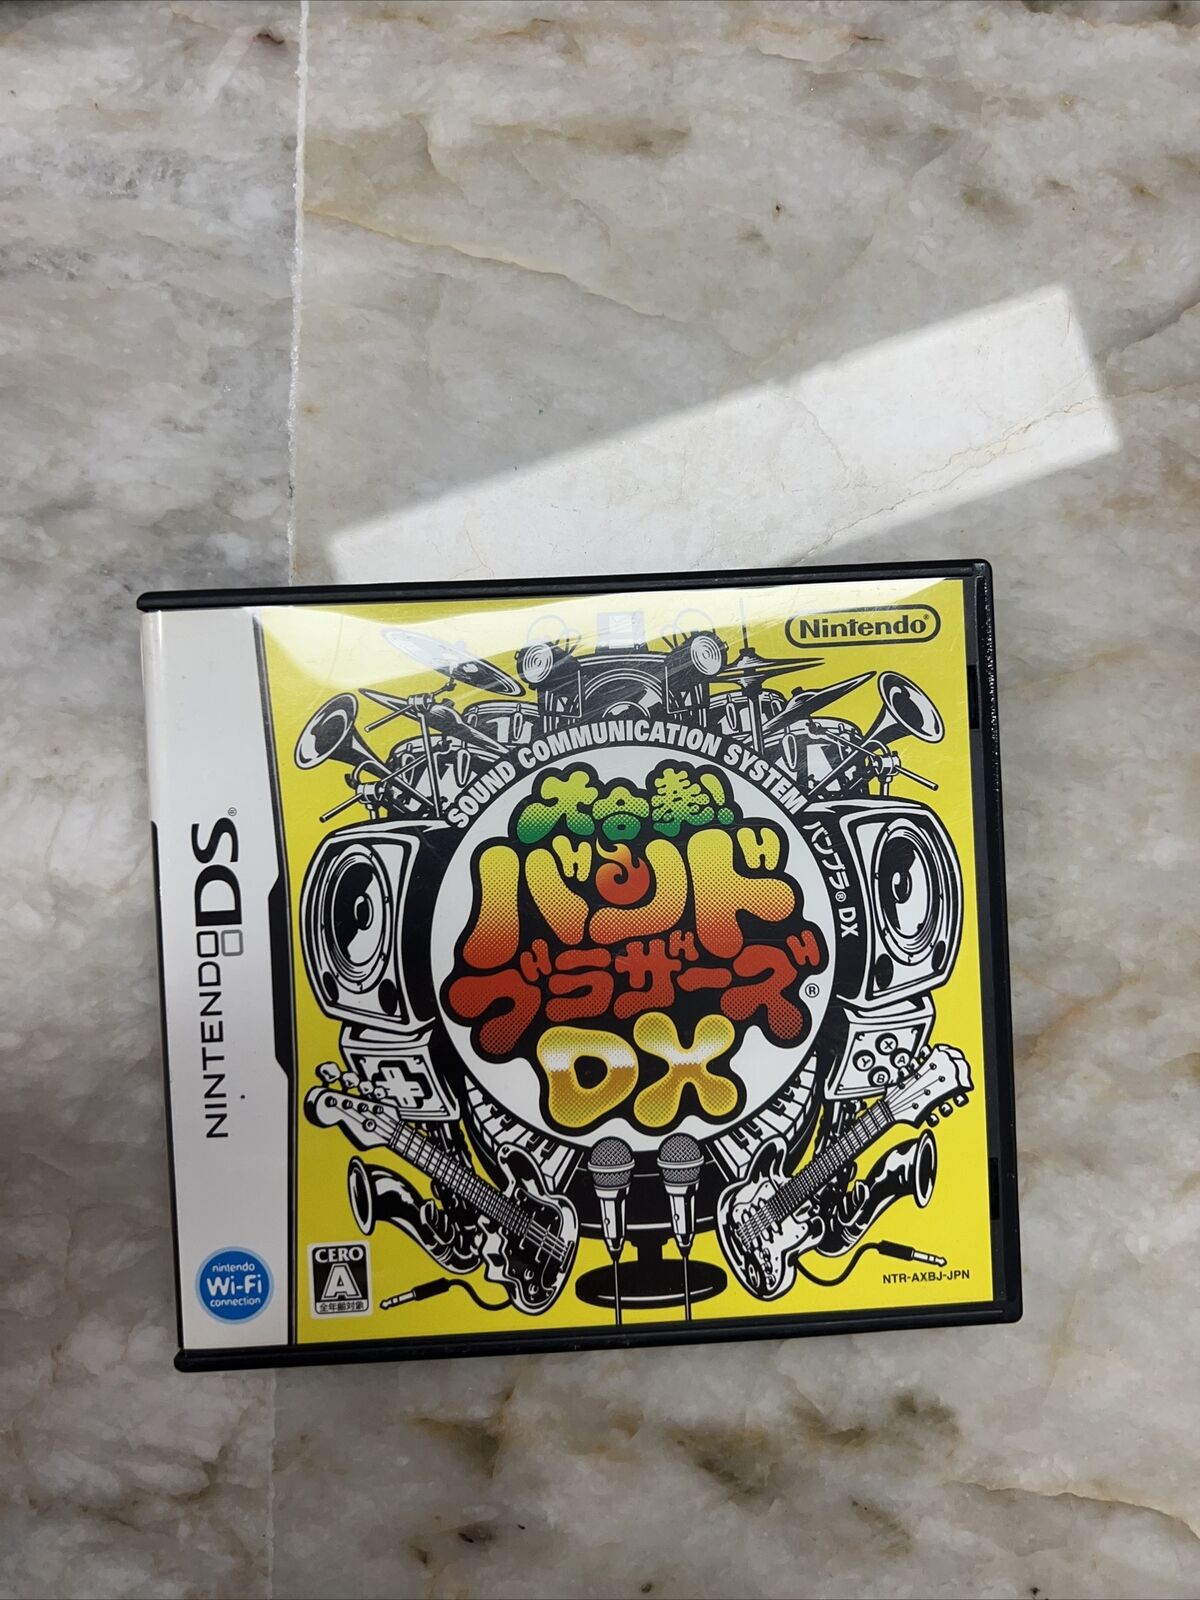 Daigasso Band Brothers DX Japanese Nintendo DS Japan Import US Seller